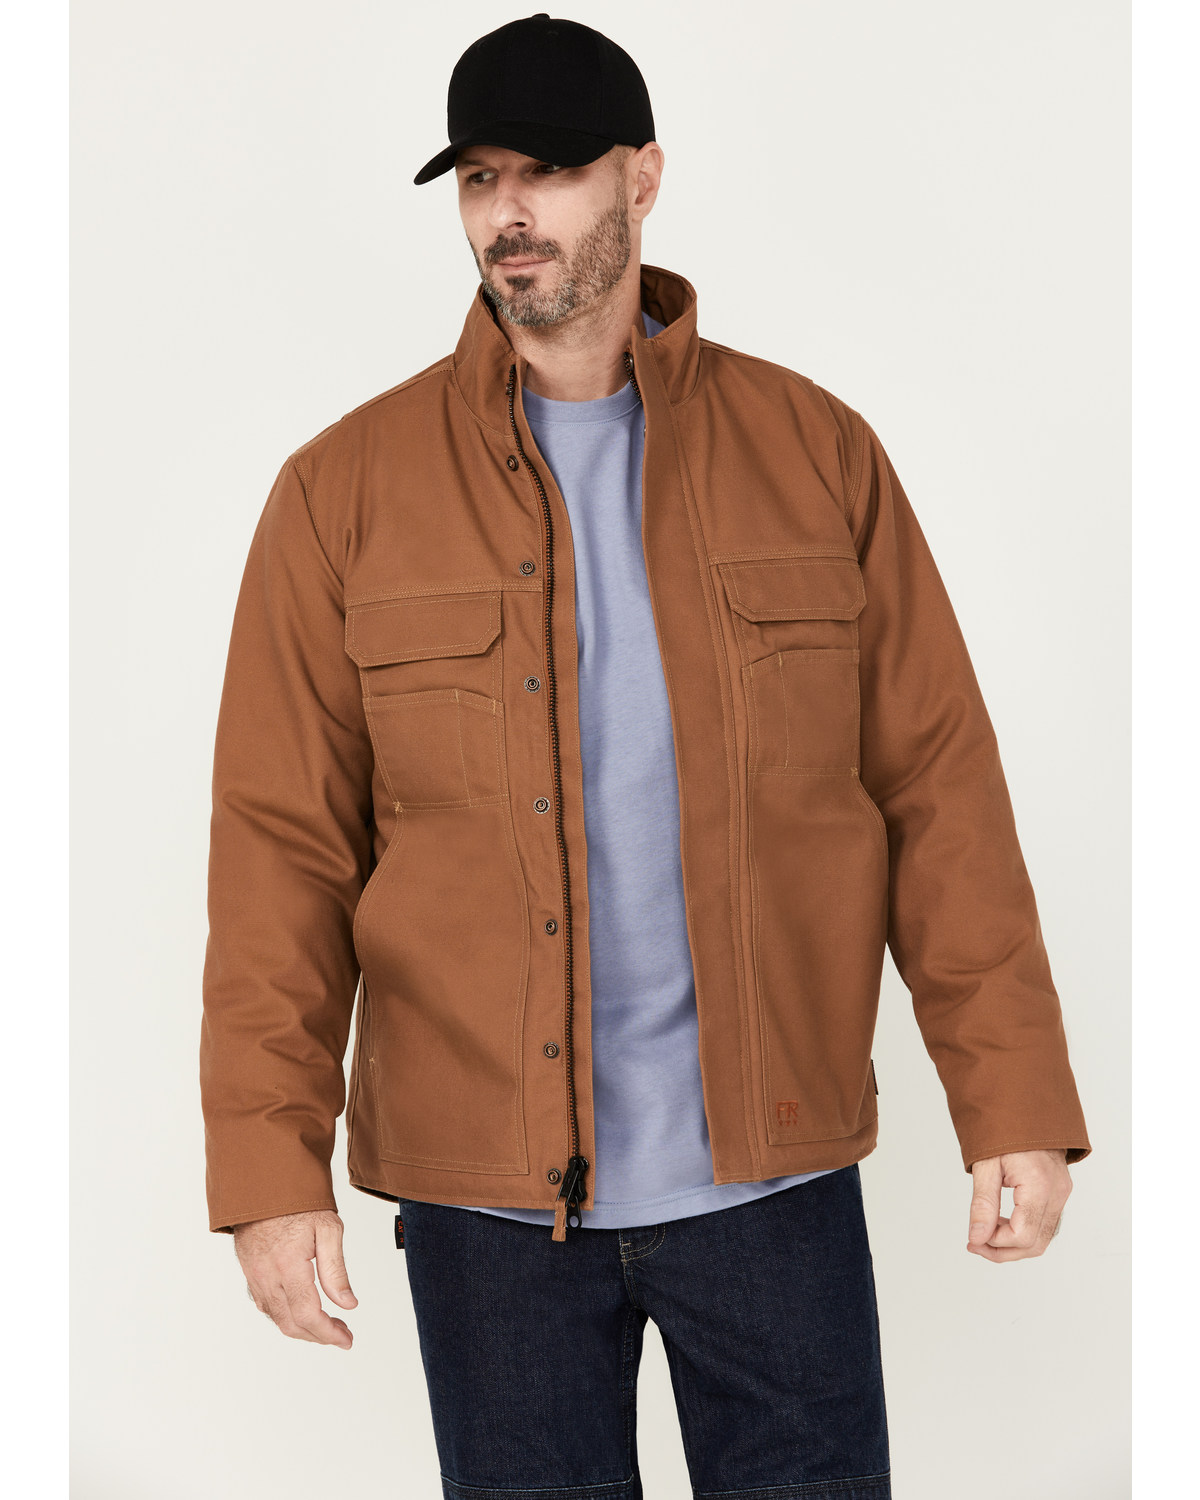 Cody James Men's FR Insulated Jacket